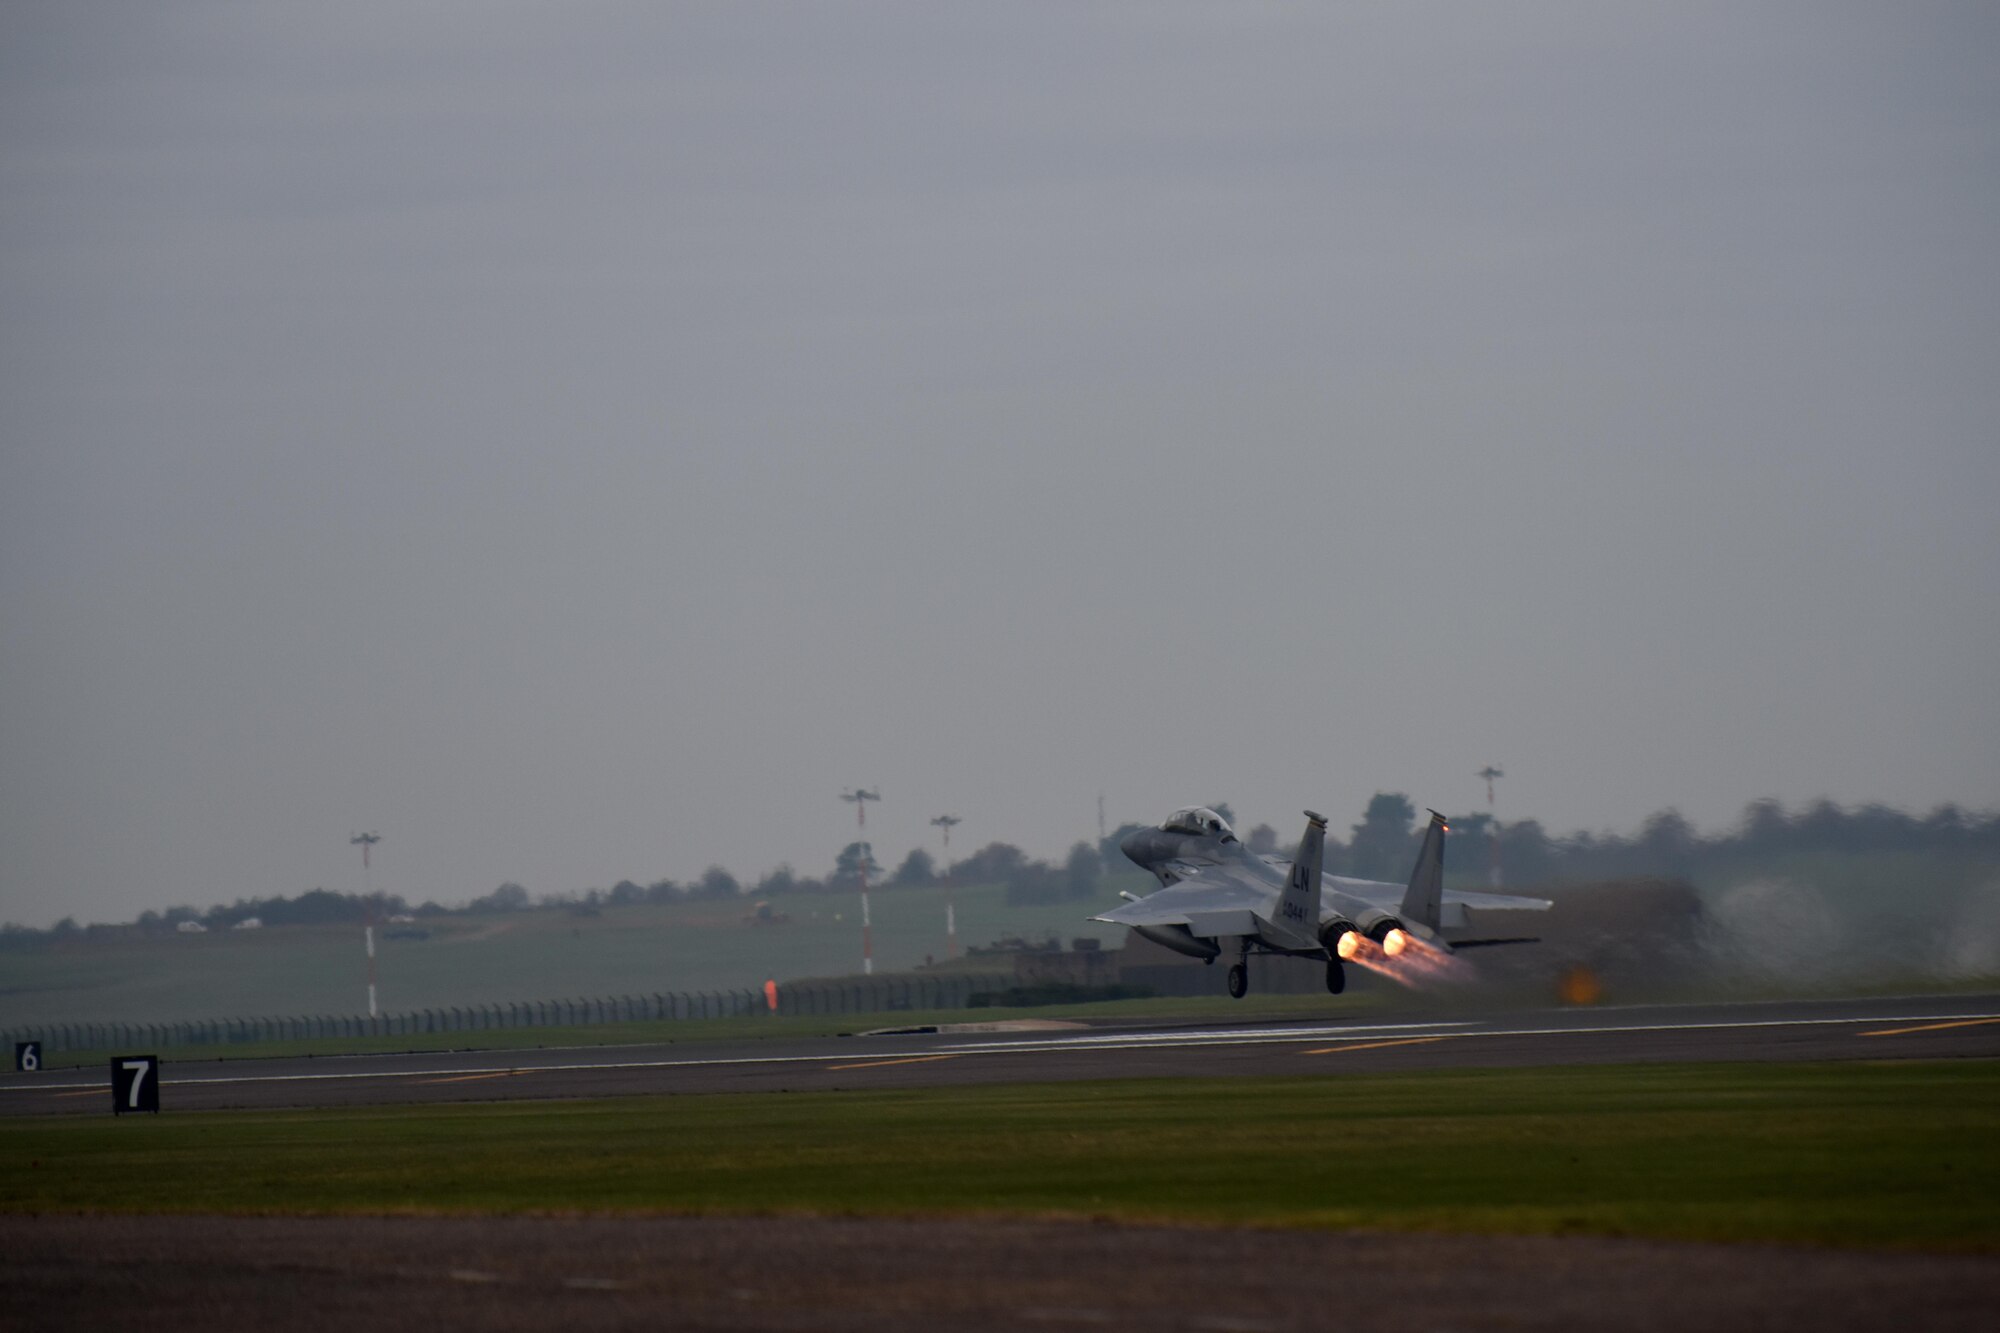 An F-15D Eagle assigned to the 493rd Fighter Squadron takes off Dec. 2, 2016, from RAF Lakenheath, England.  The jet carried U.S. Air Force Col. Thomas Torkelson, 100th Air Refueling Wing commander, on a familiarization flight in an F-15. (U.S. Air Force photo/Airman 1st Class Eli Chevalier)  